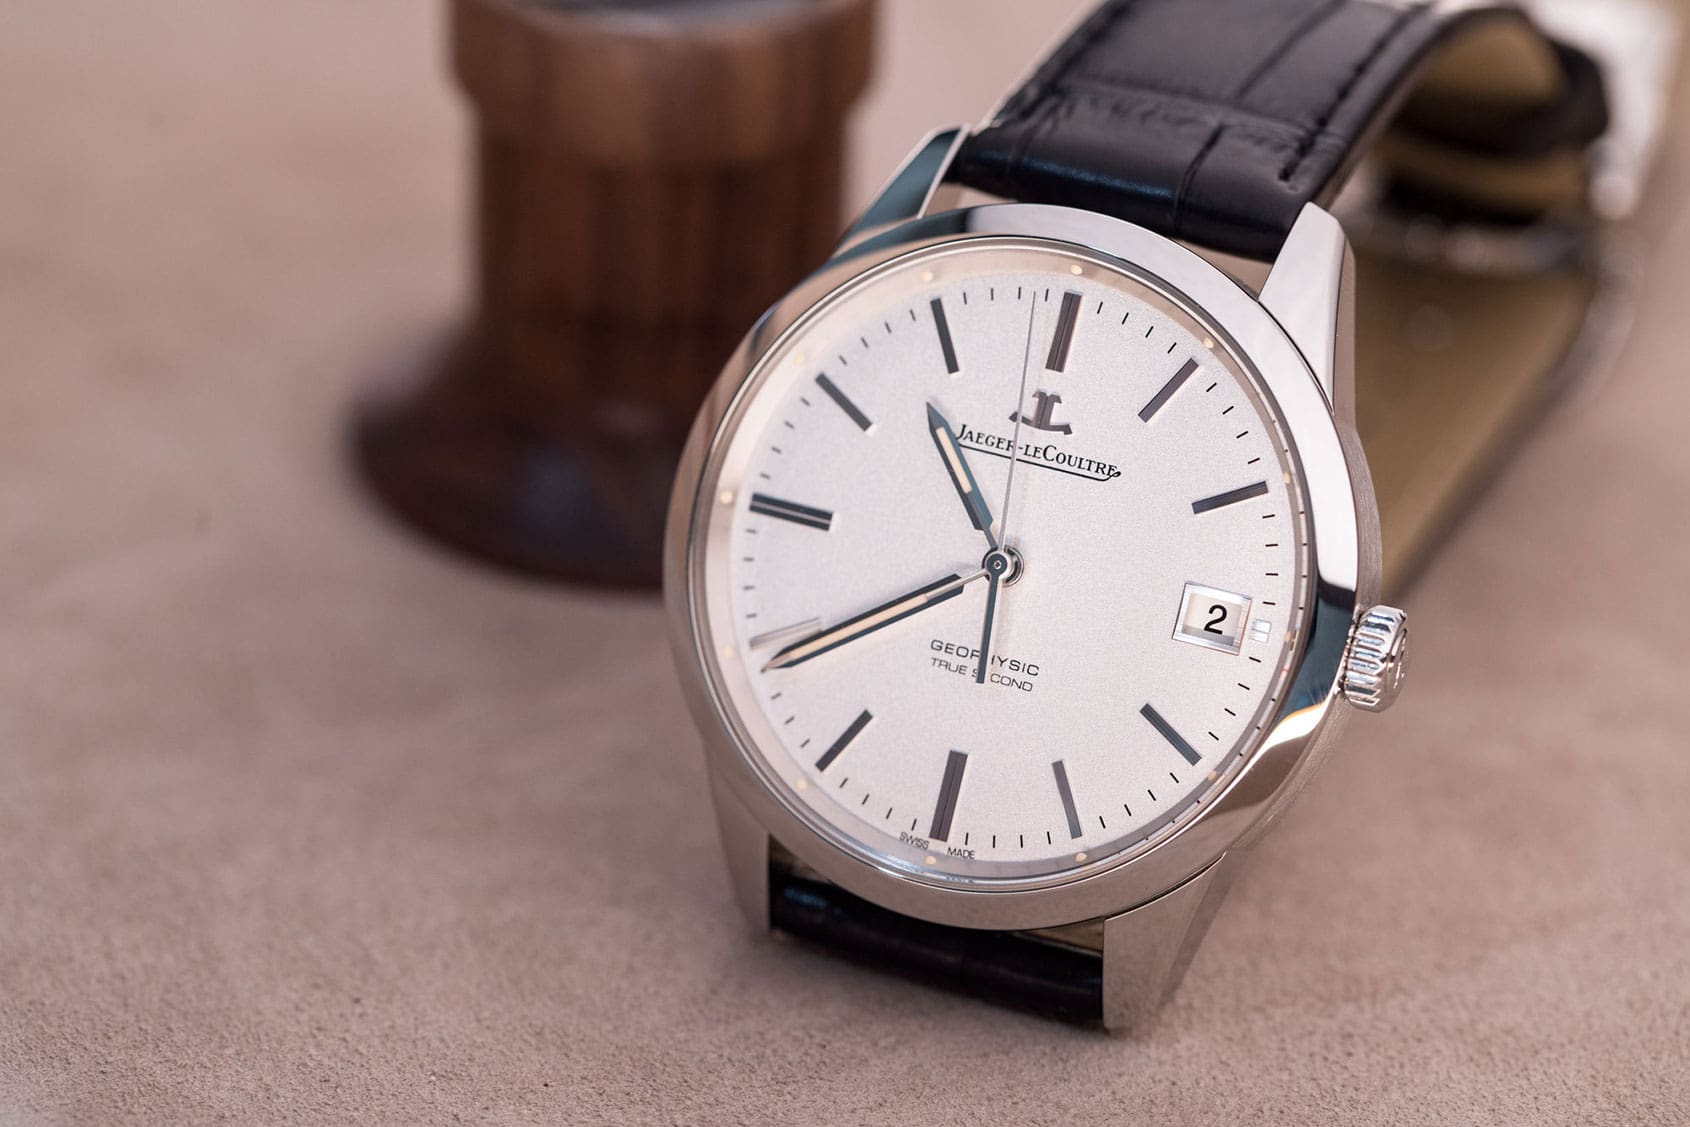 VIDEO: There’s more to the Jaeger-LeCoultre Geophysic True Second than meets the eye